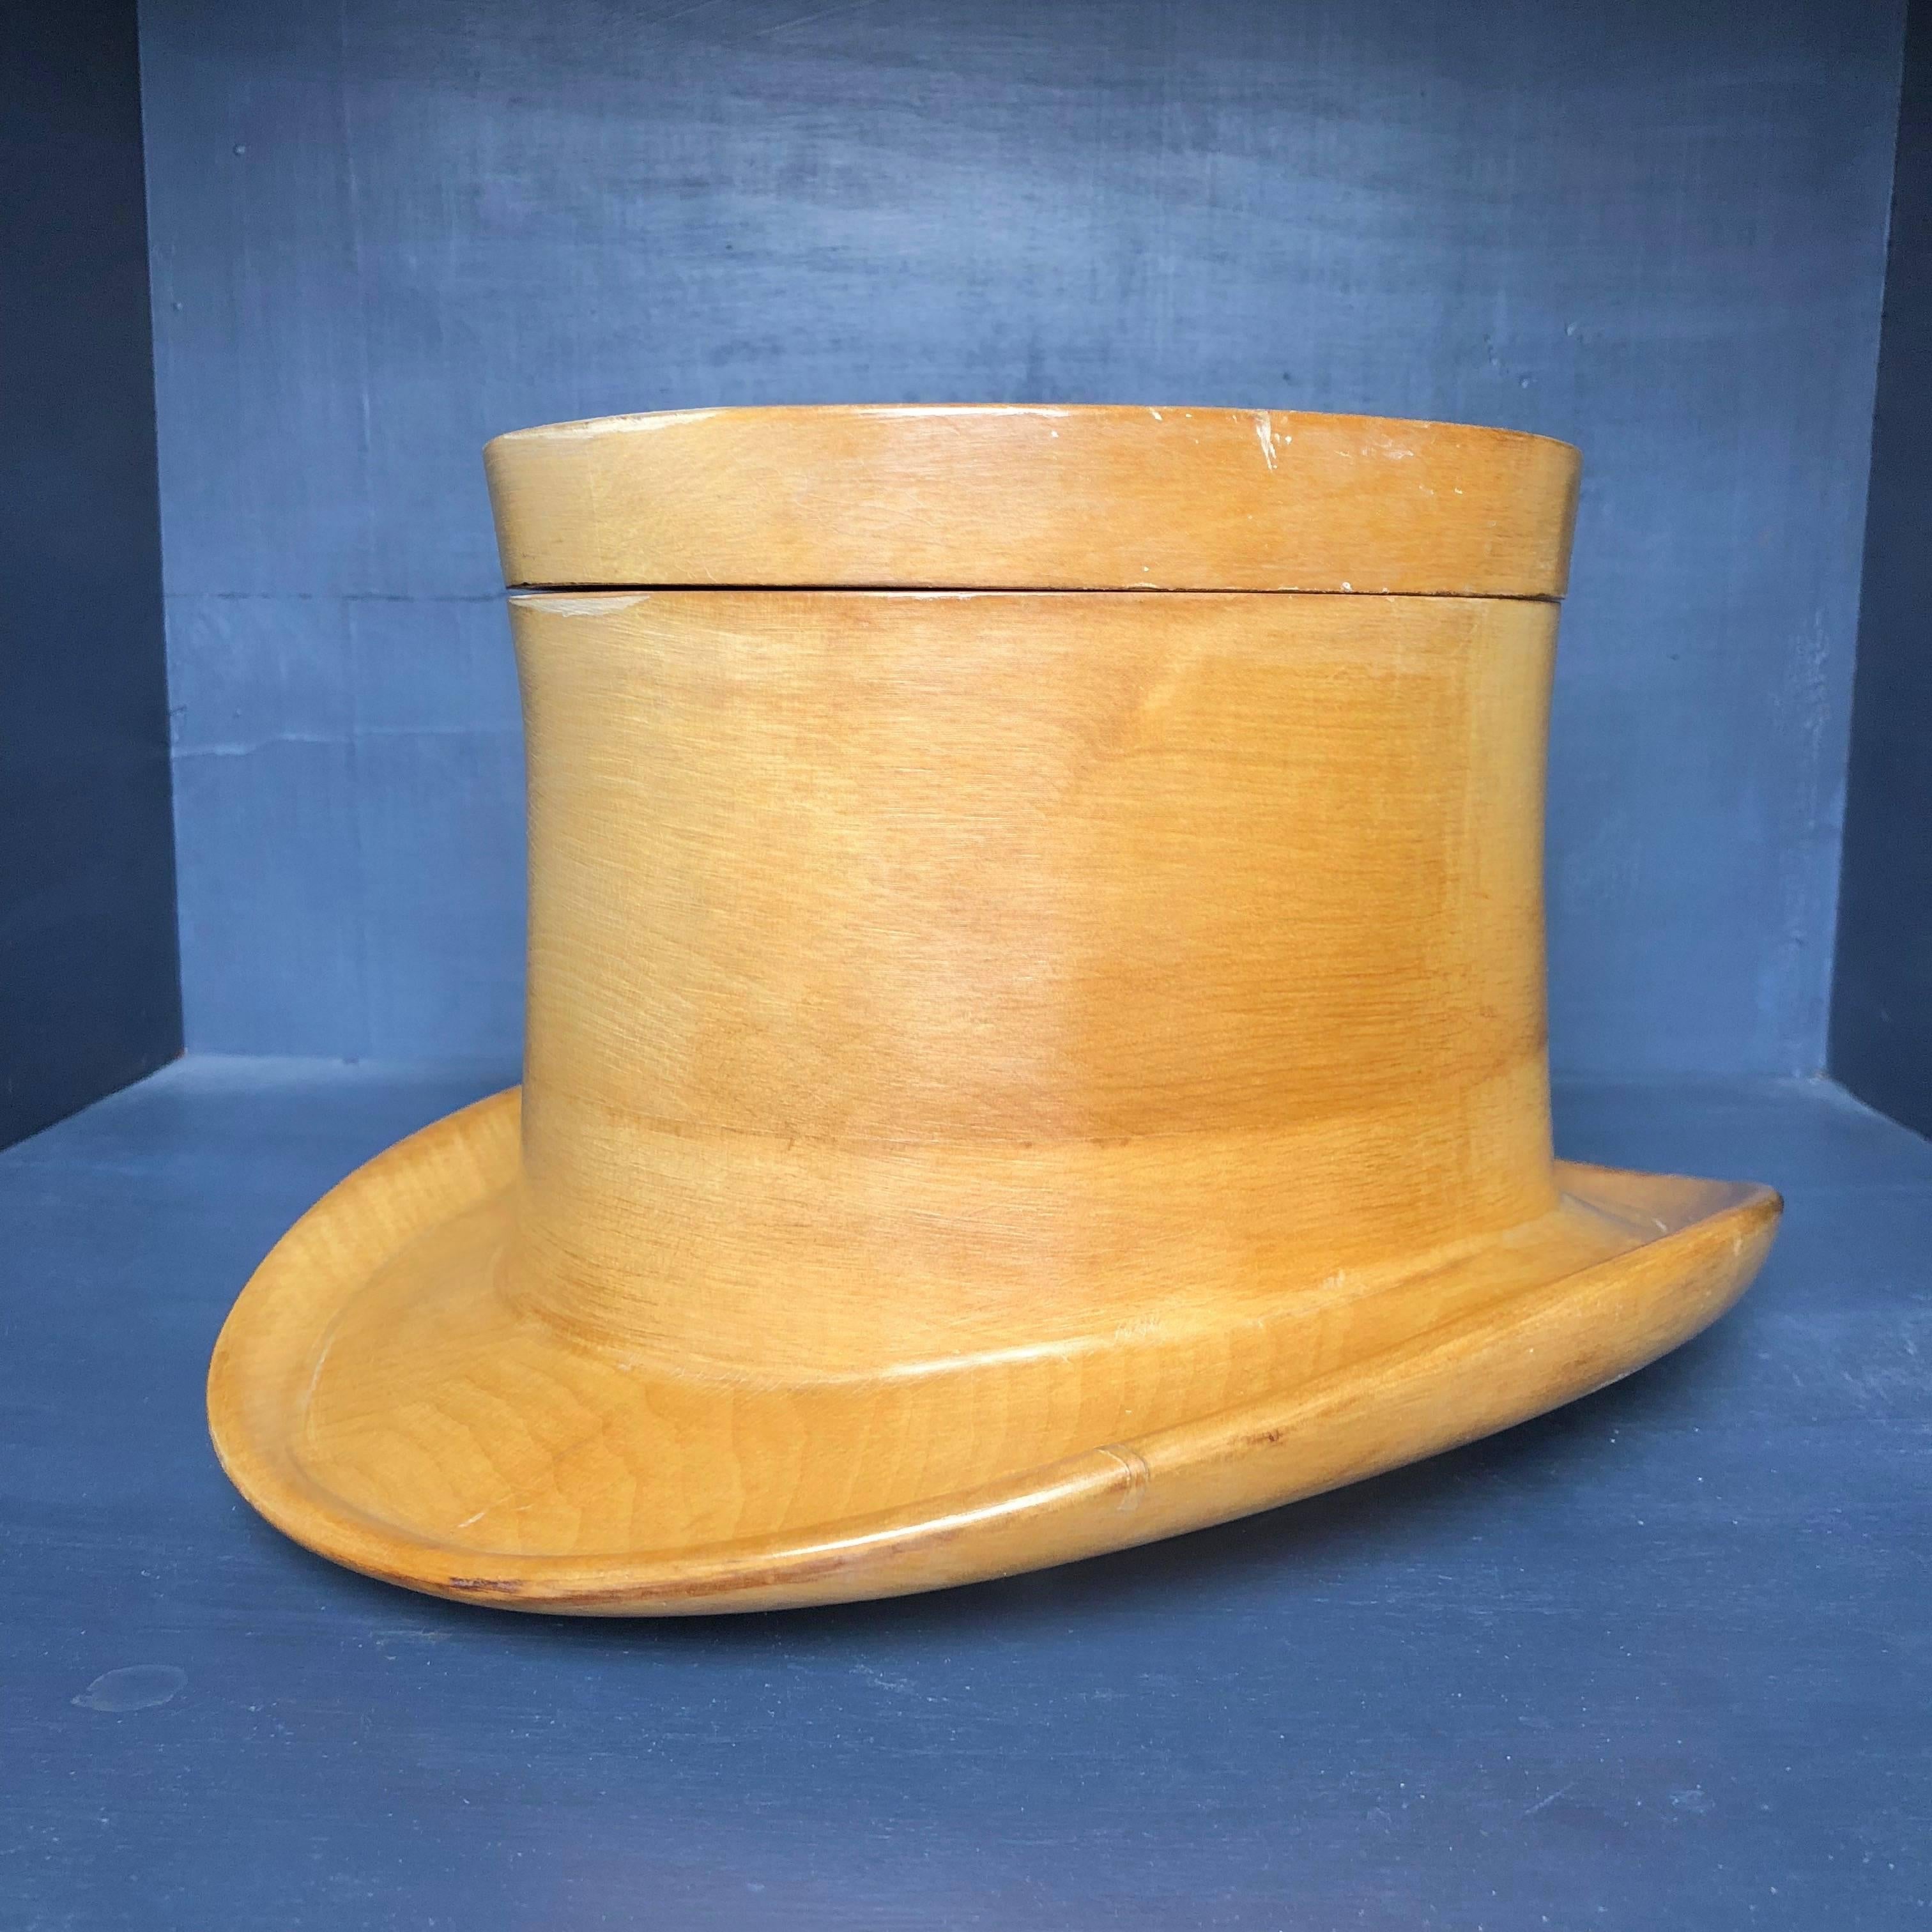 Plastic Wooden Ice Bucket in the Shape of a Top Hat, 1970, Mid-Century Modern